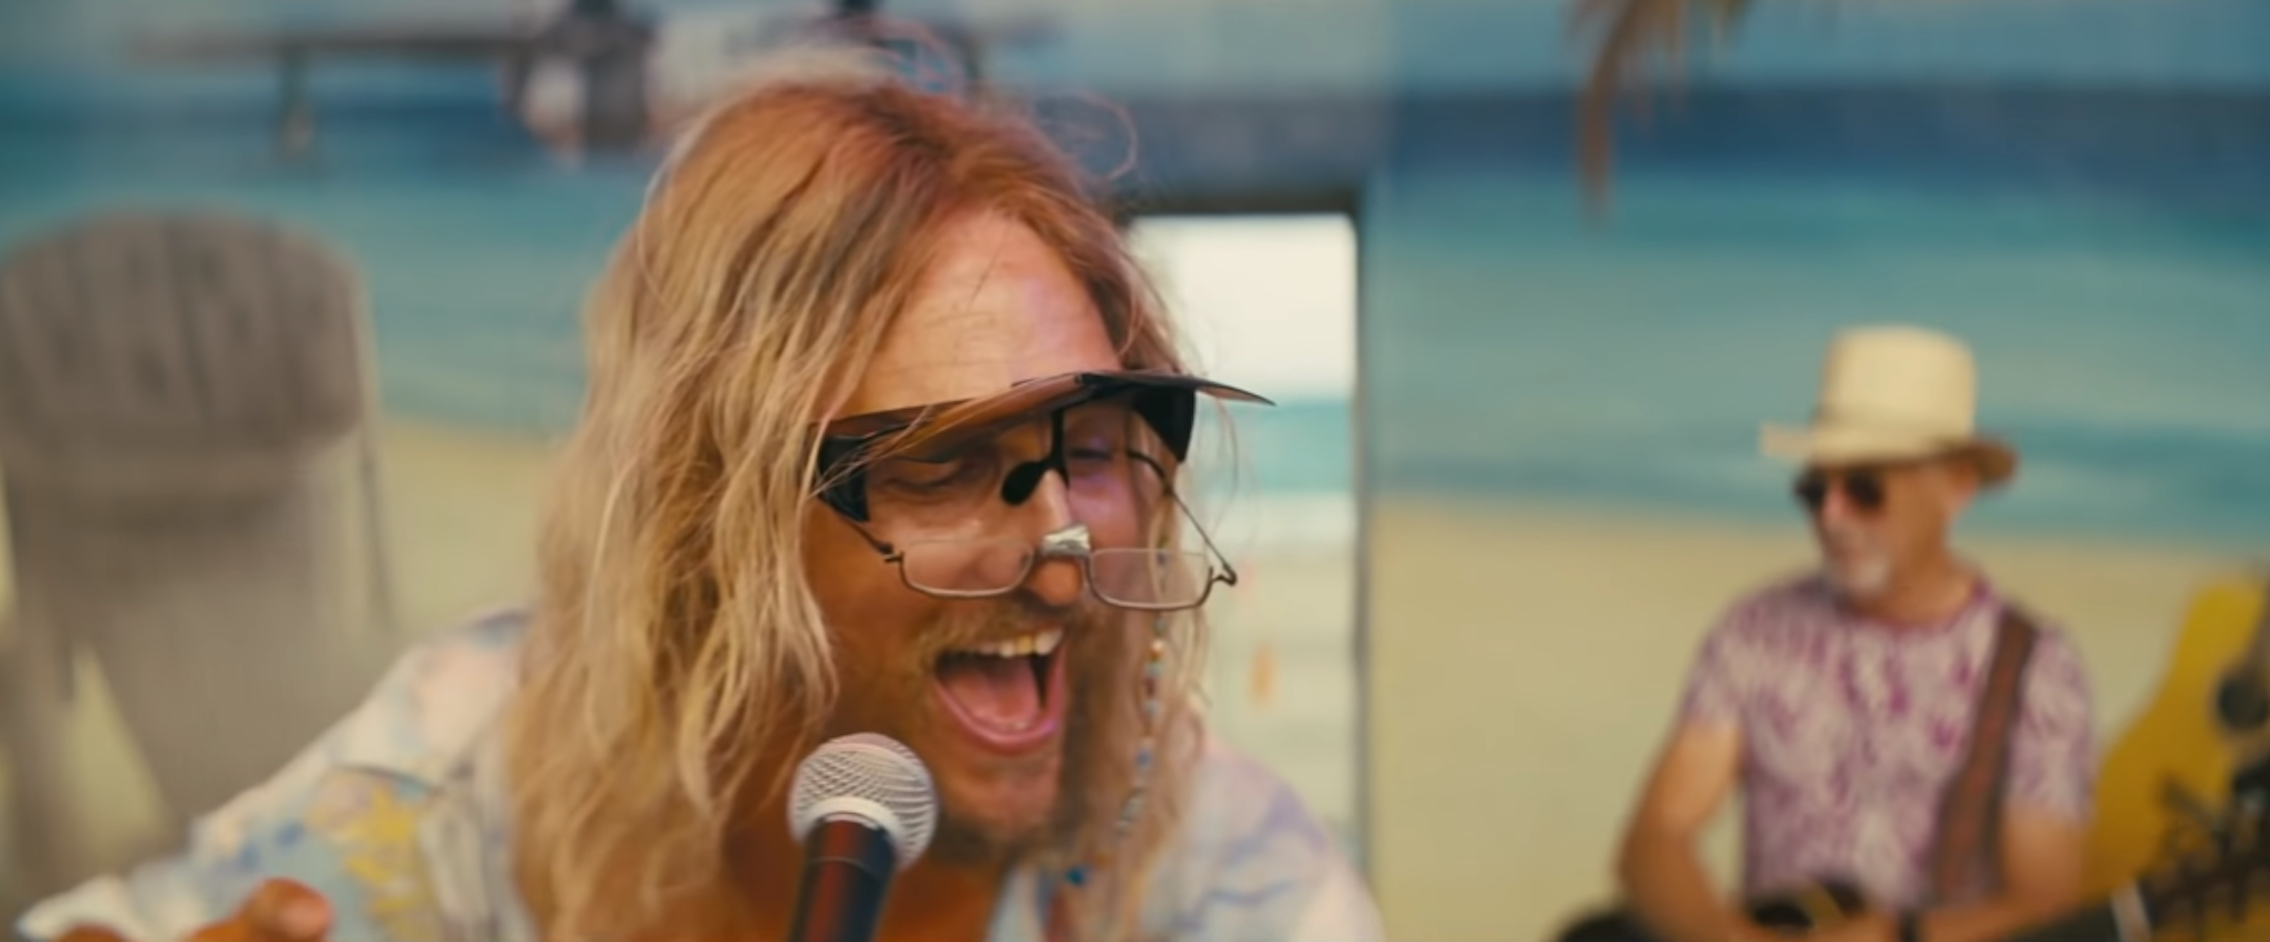 The Beach Bum Stoner Comedy Is Now Streaming On Hulu